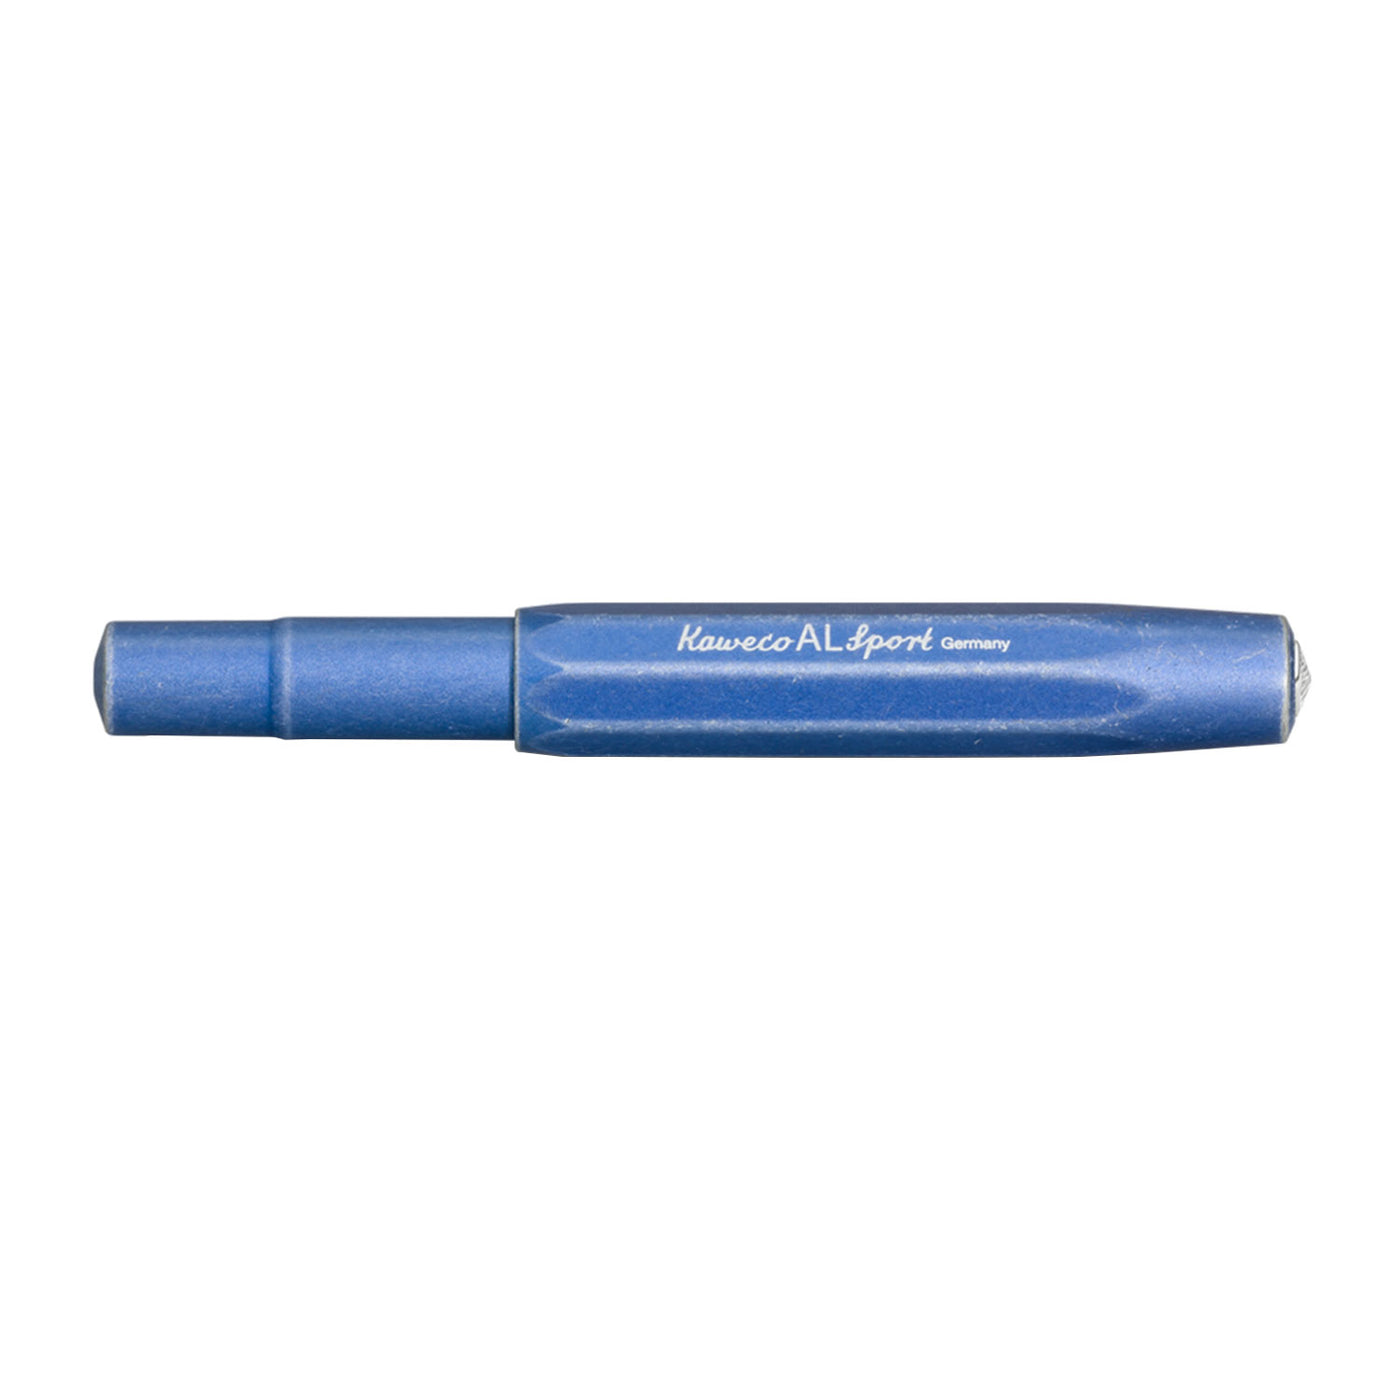 Kaweco AL Sport Fountain Pen with Optional Clip - Stonewashed Blue 5